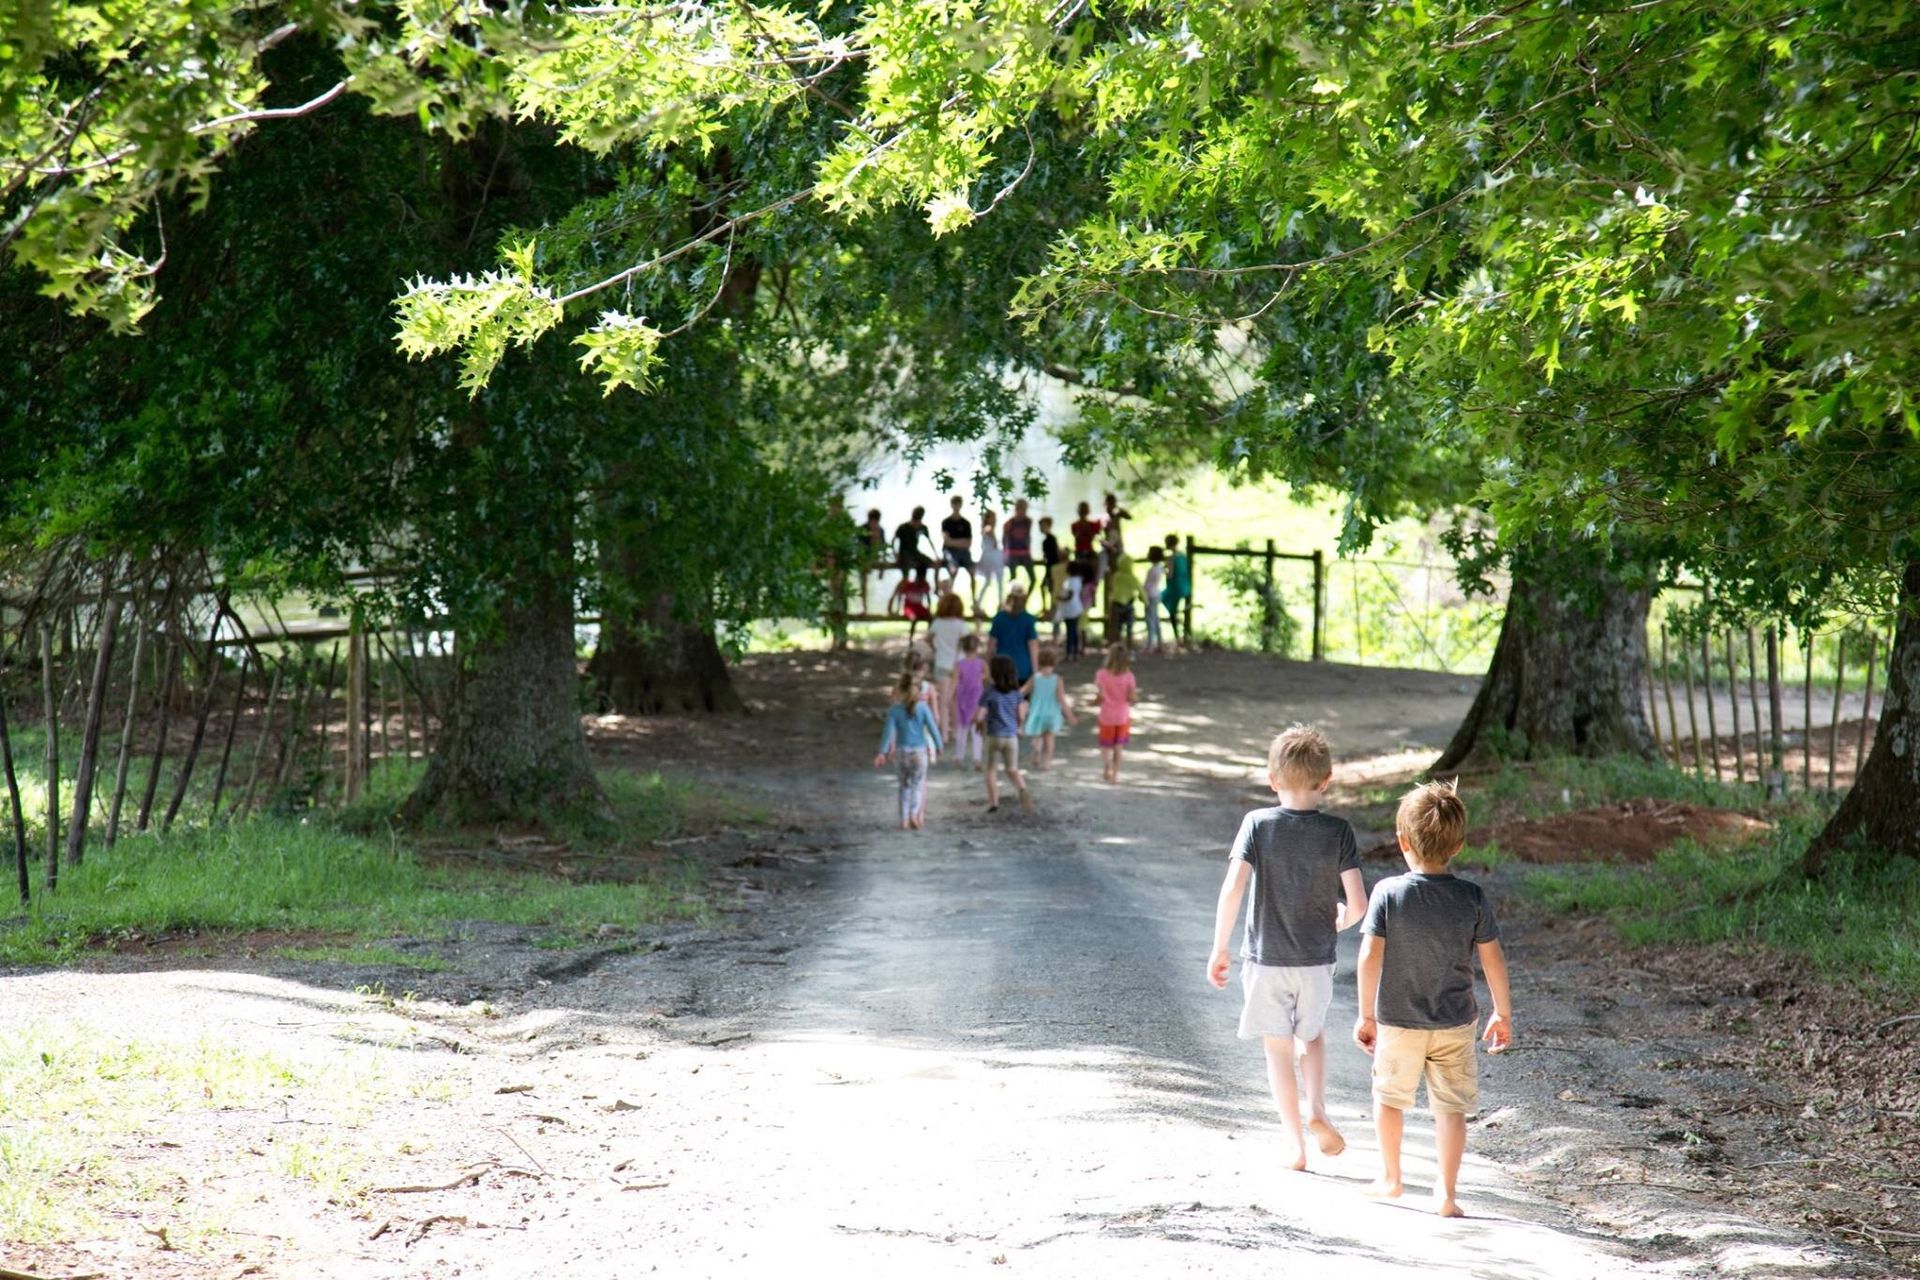 Children walking and running down a country lane